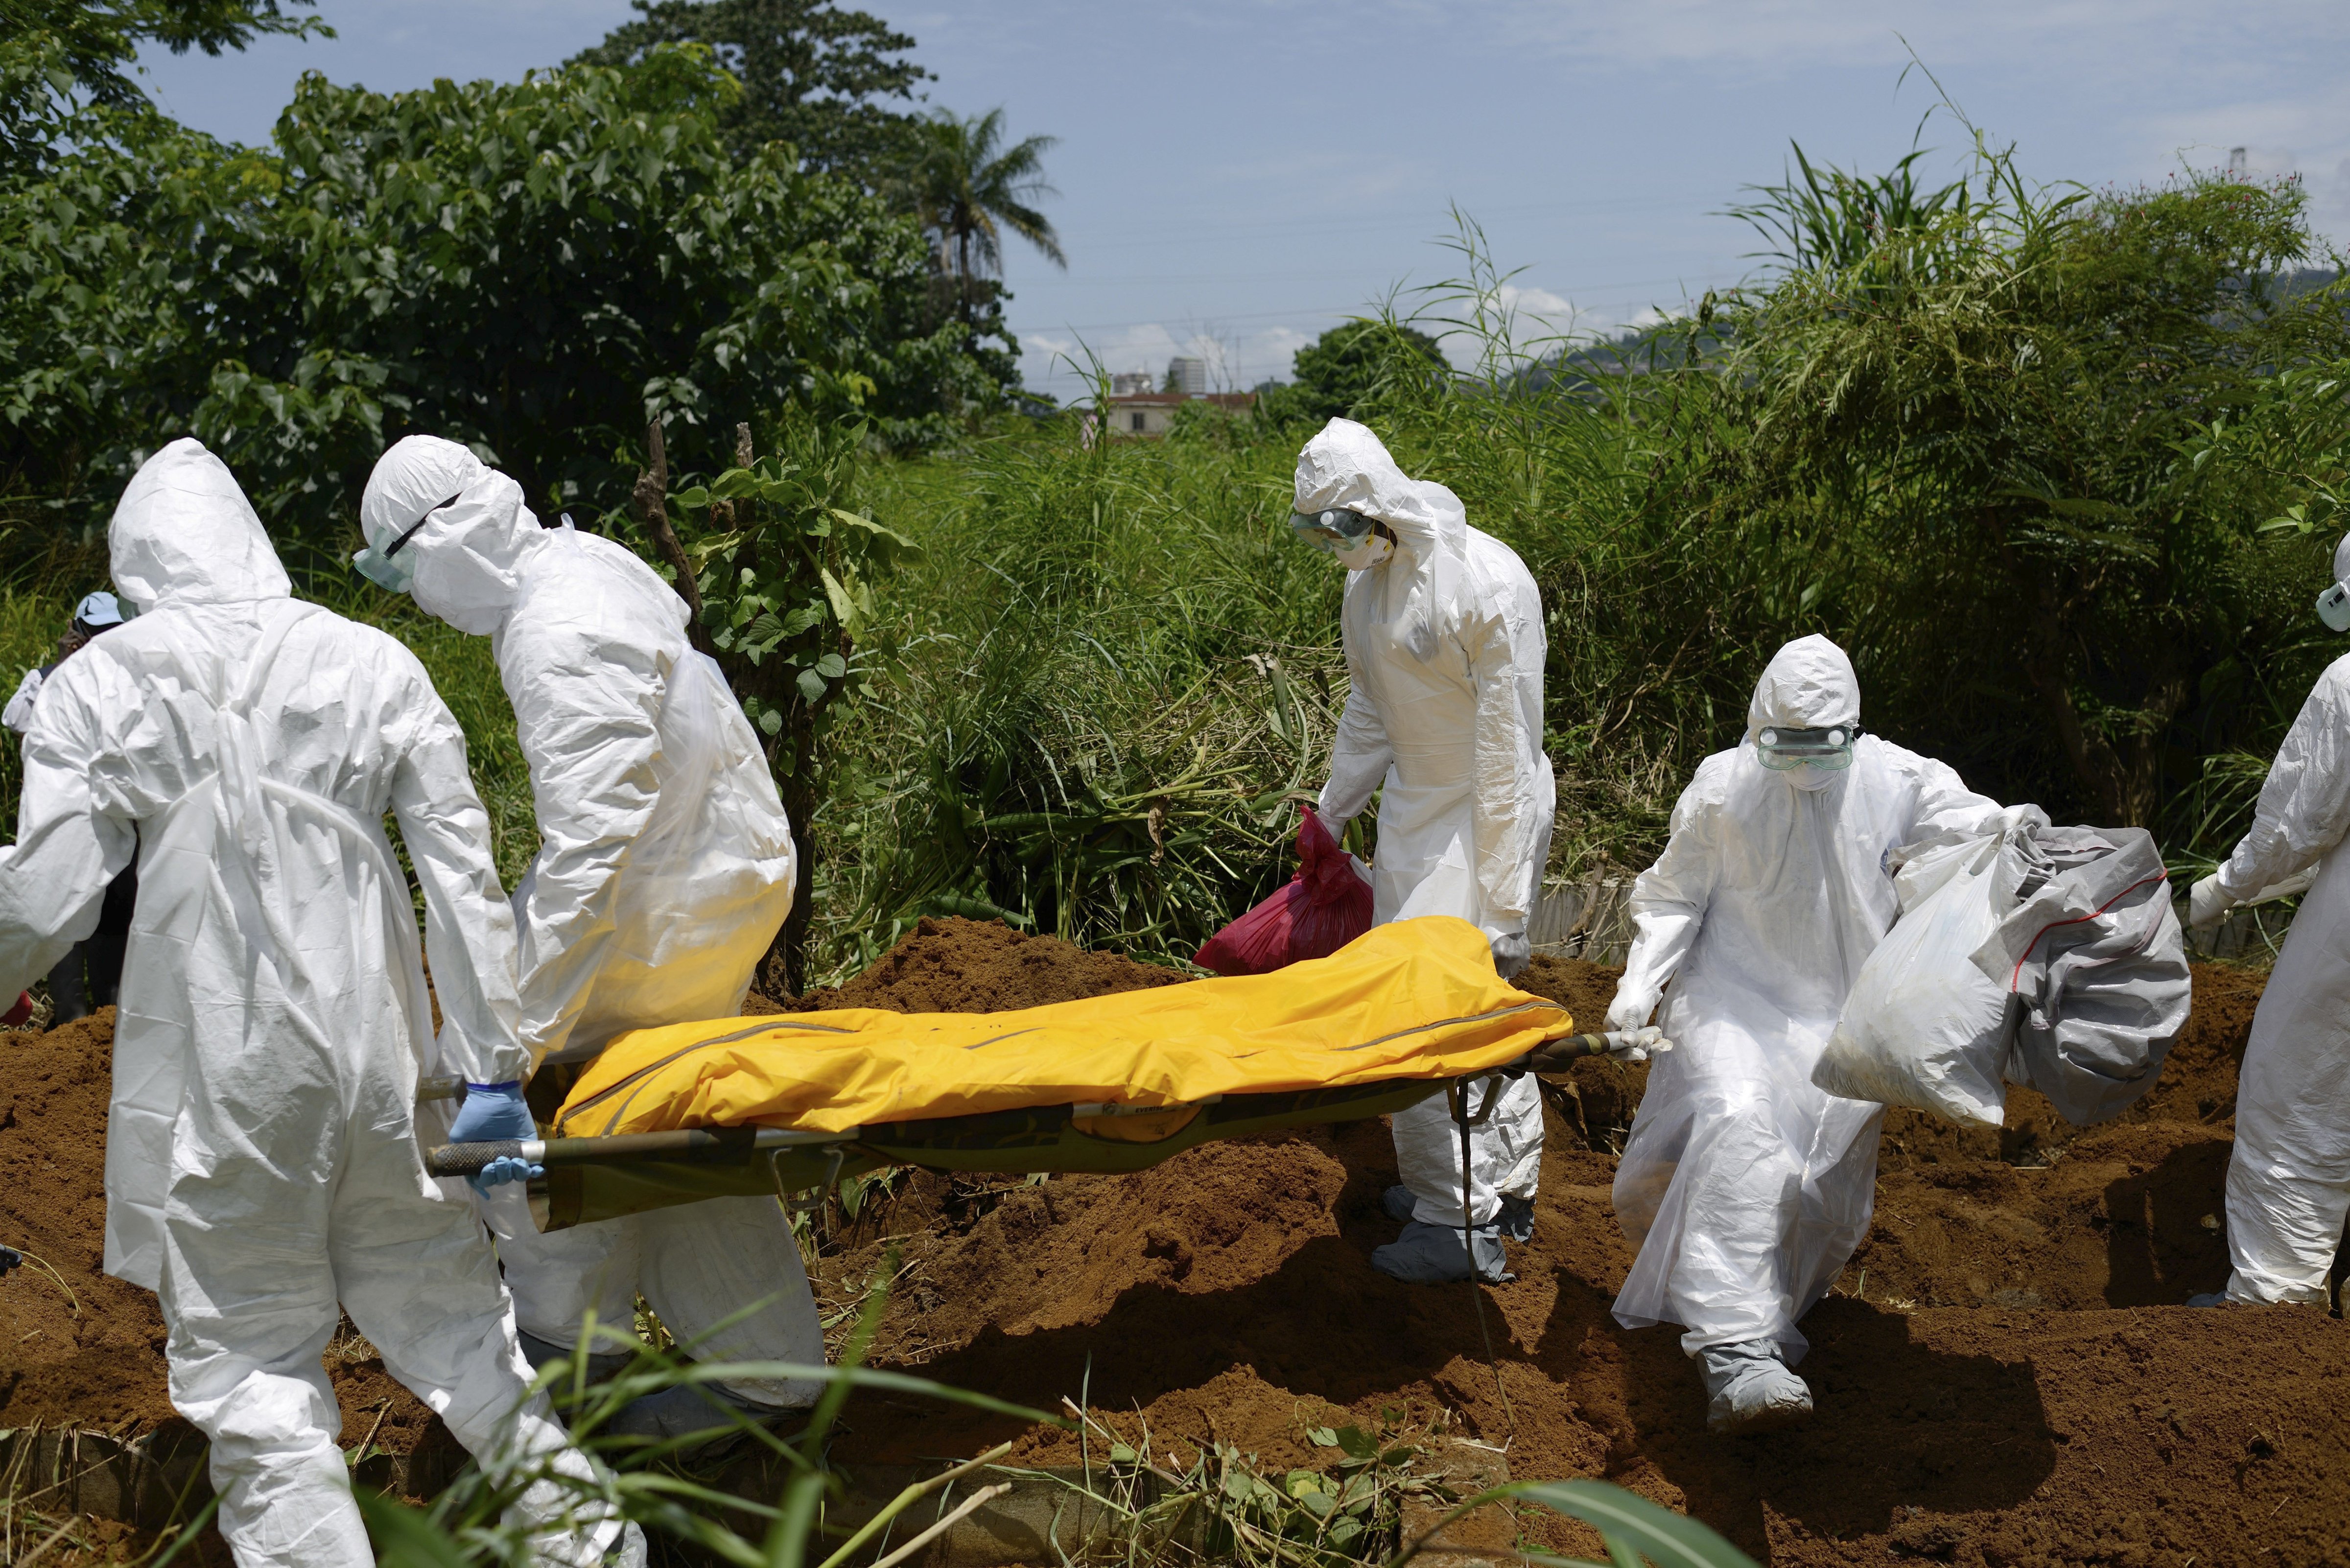 Members of a burial team wearing protective suits bury an Ebola victim in Freetown, Sierra Leone.